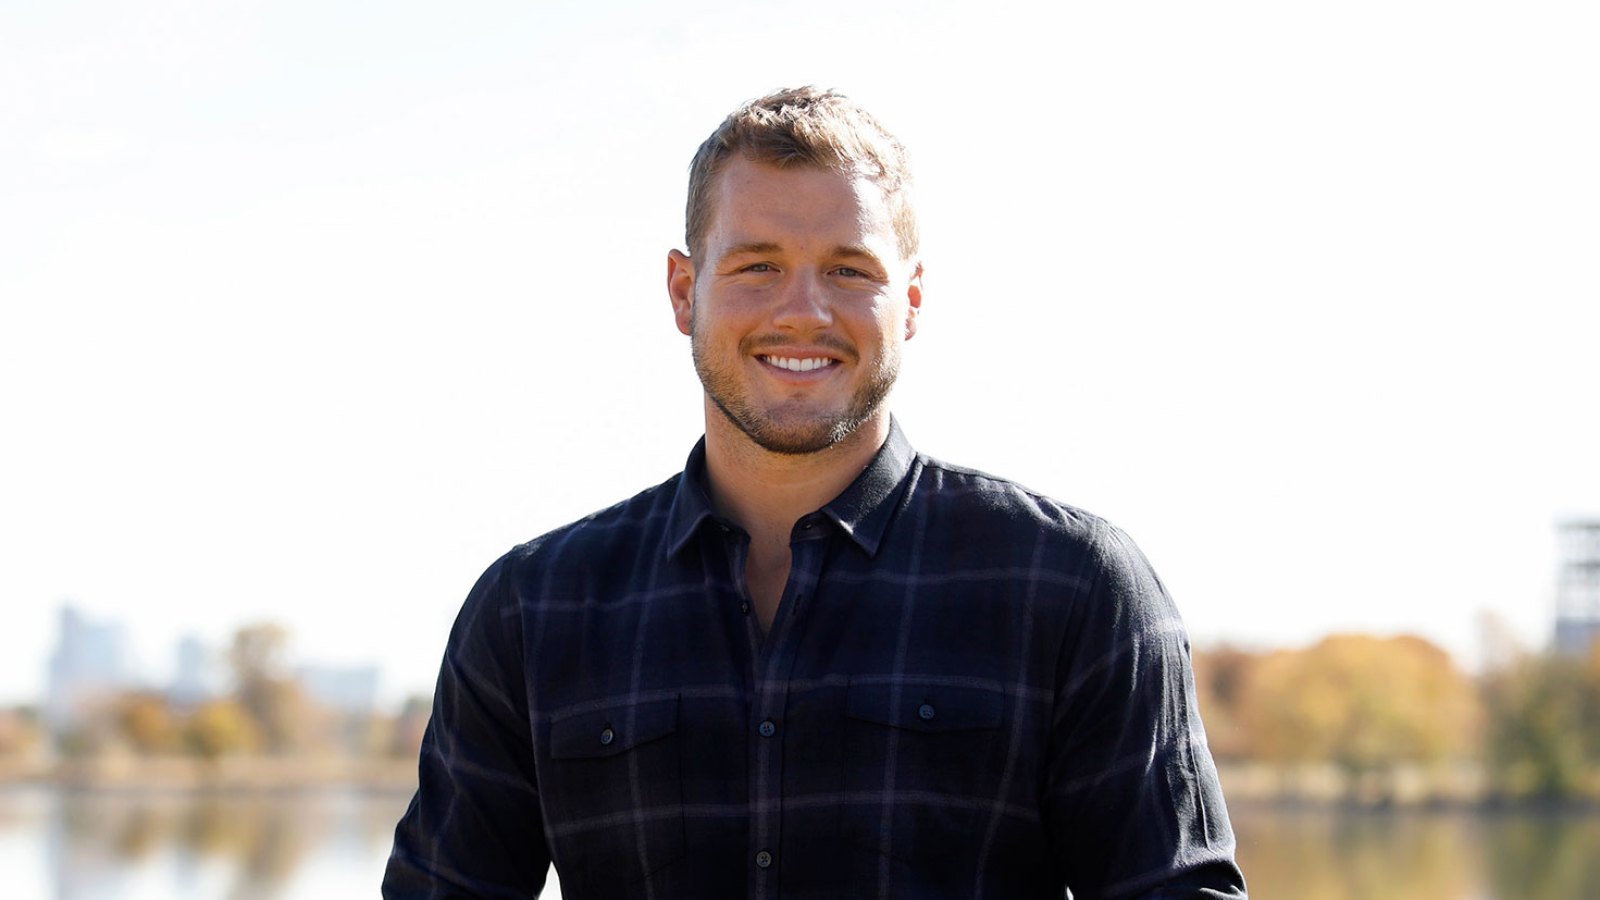 Colton Underwood Reveals He Sees a Therapist ‘Regularly’: ‘Mental Health Is Health’